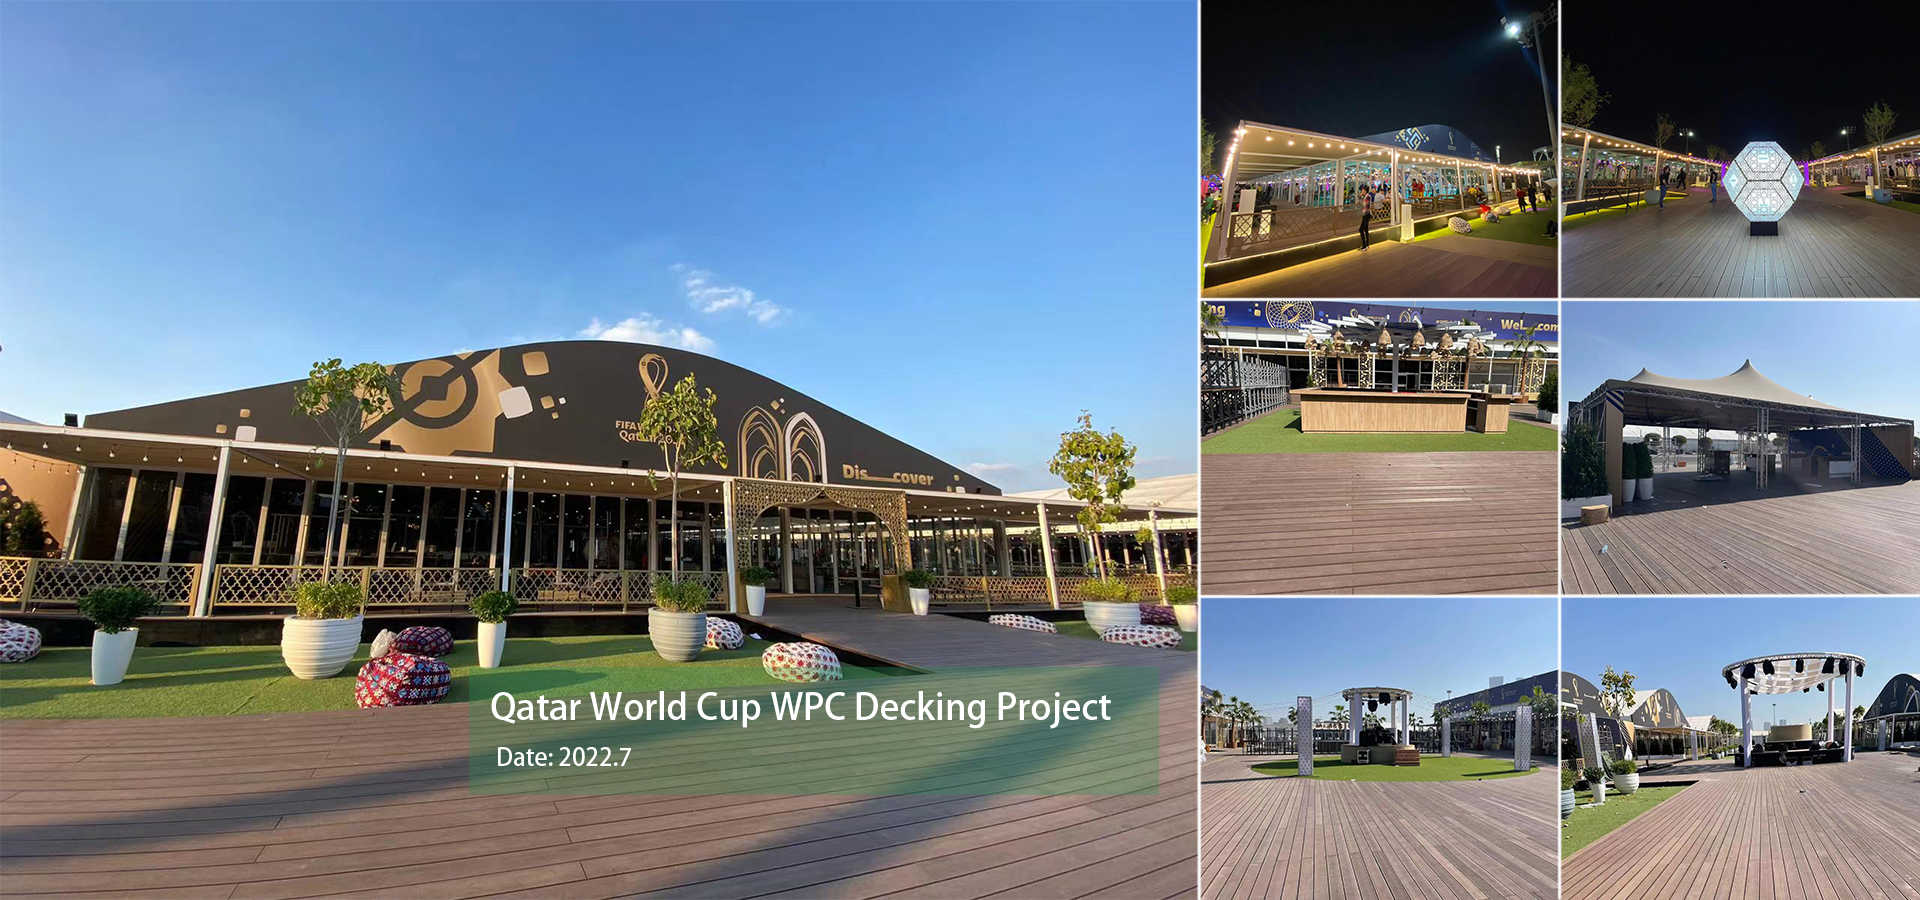 Qatar World Cup WPC Decking Project